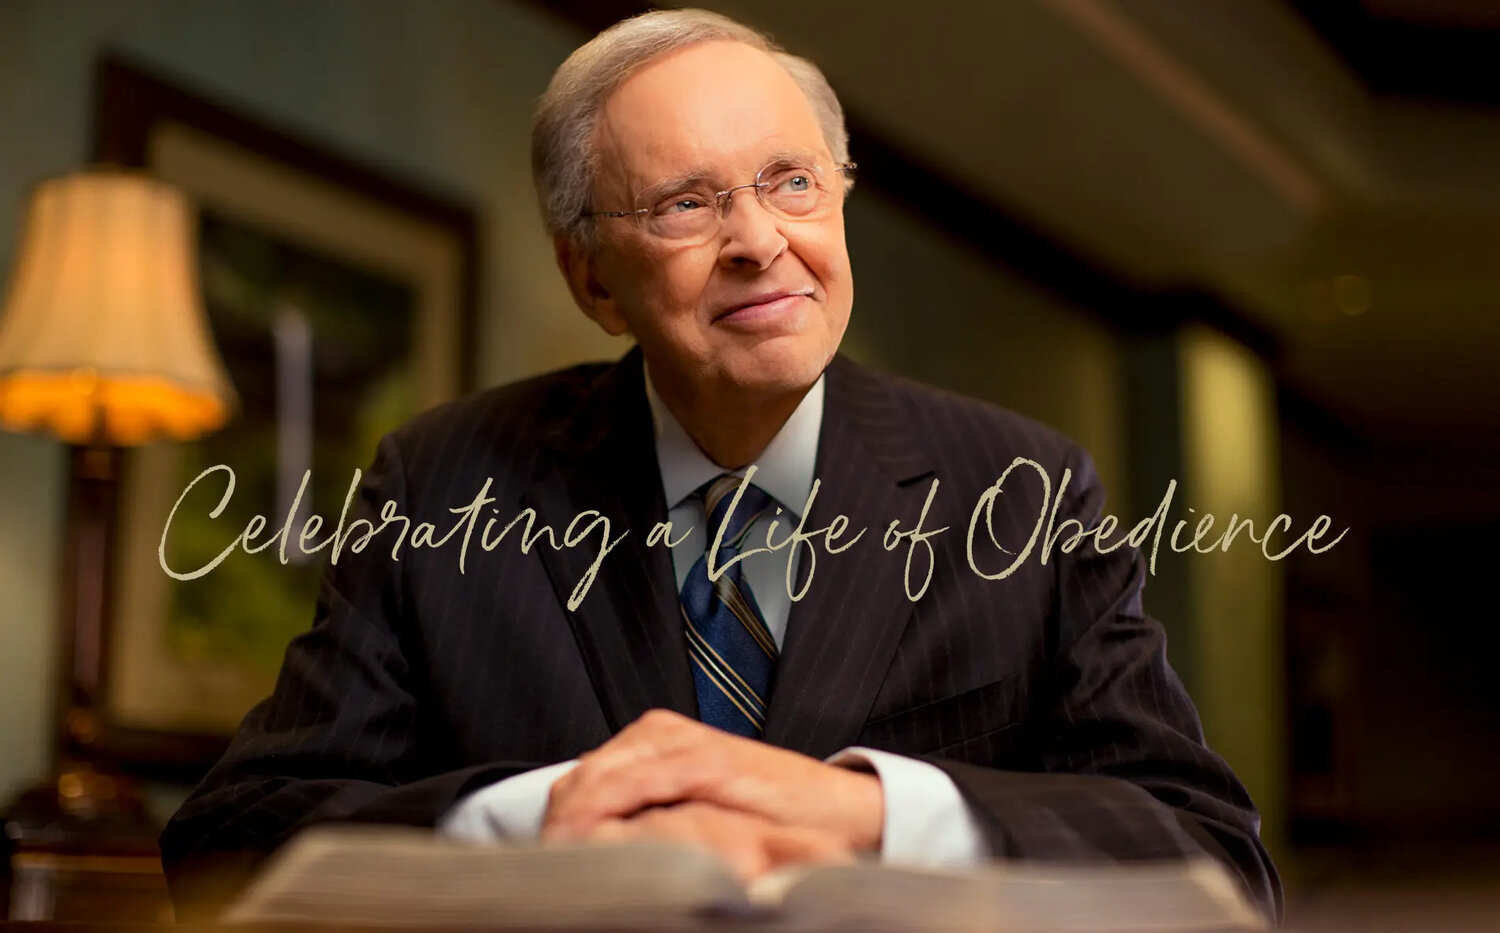 Obituary Dr. Charles Stanley, founder of In Touch Ministries and